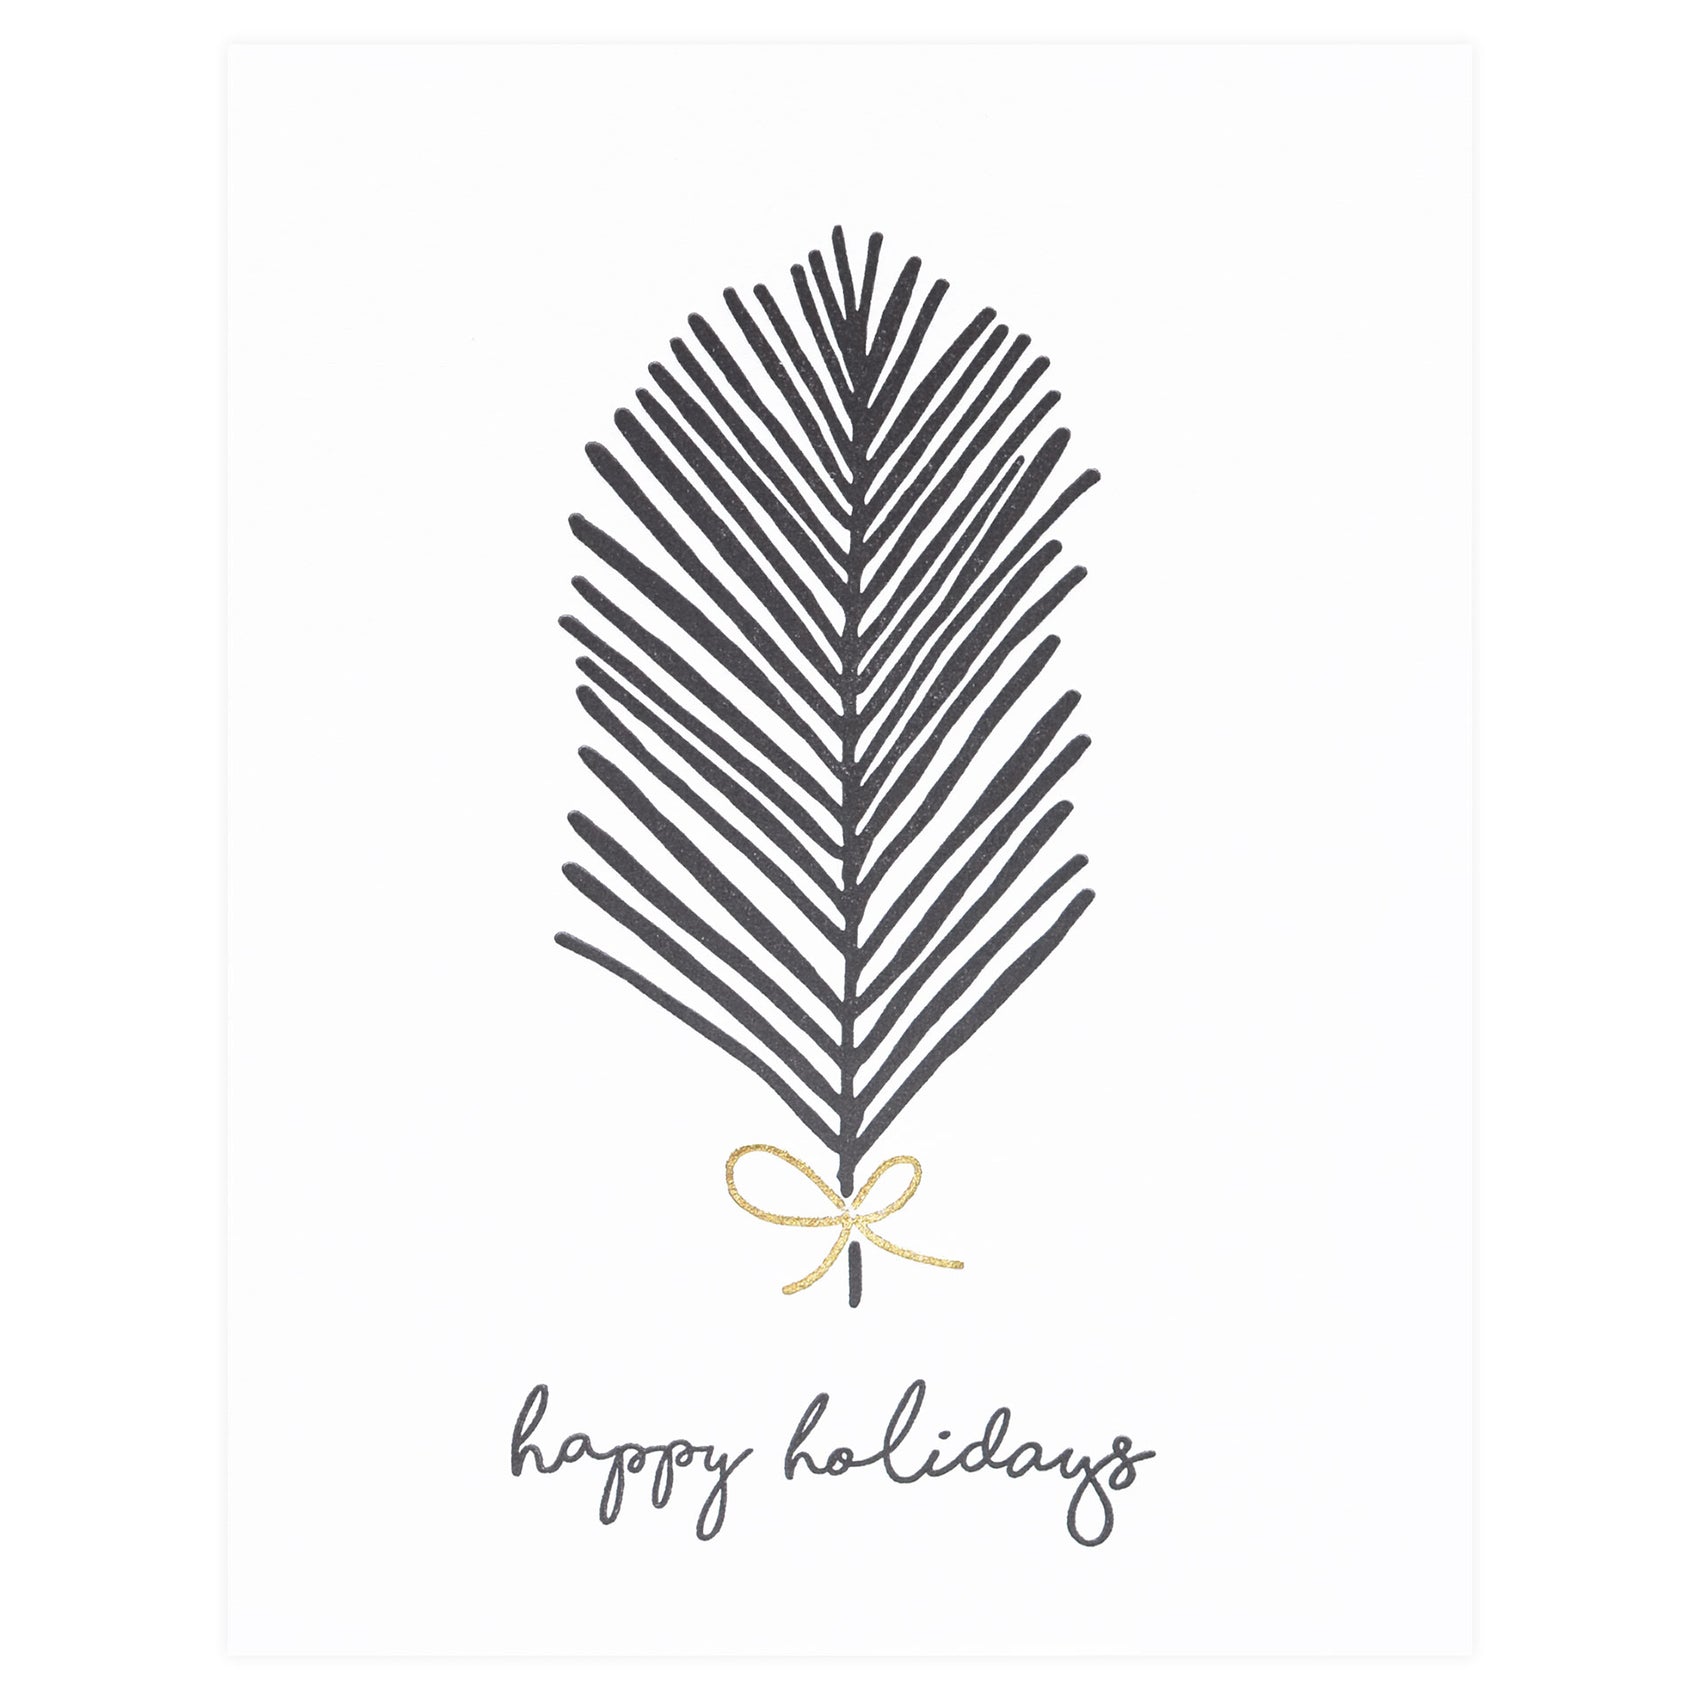 Hello Paper Co. Holiday Fern Greeting Card 